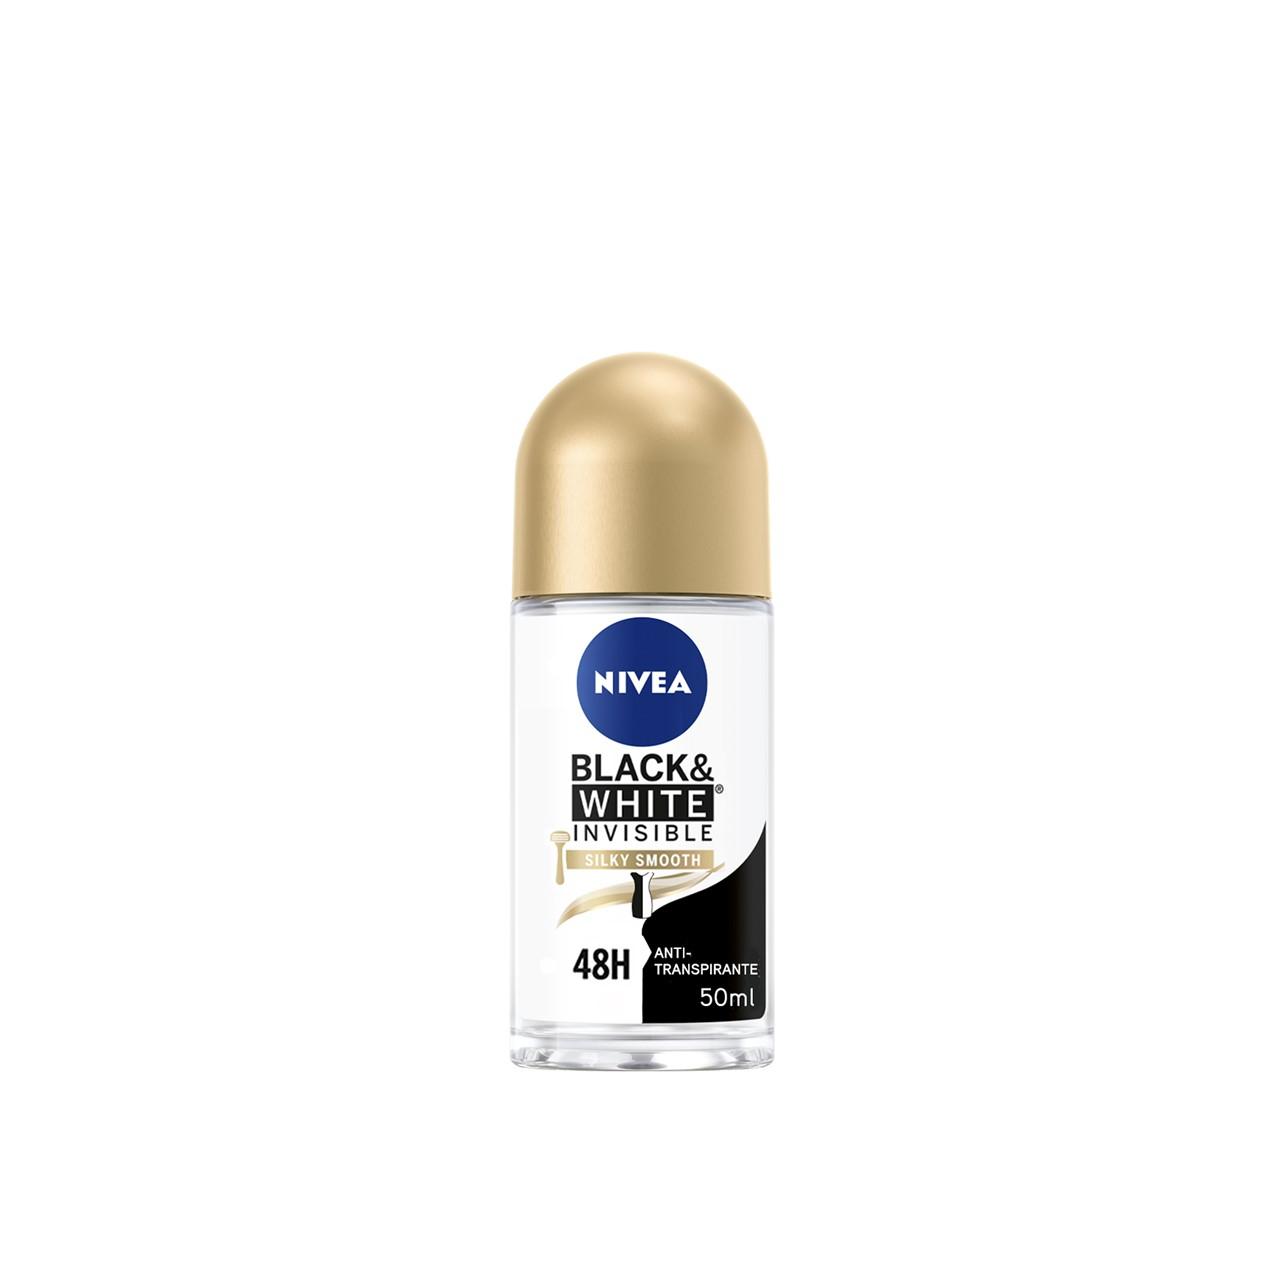 https://static.beautytocare.com/cdn-cgi/image/width=1600,height=1600,f=auto/media/catalog/product//n/i/nivea-black-white-invisible-silky-smooth-roll-on-50ml_2.jpg